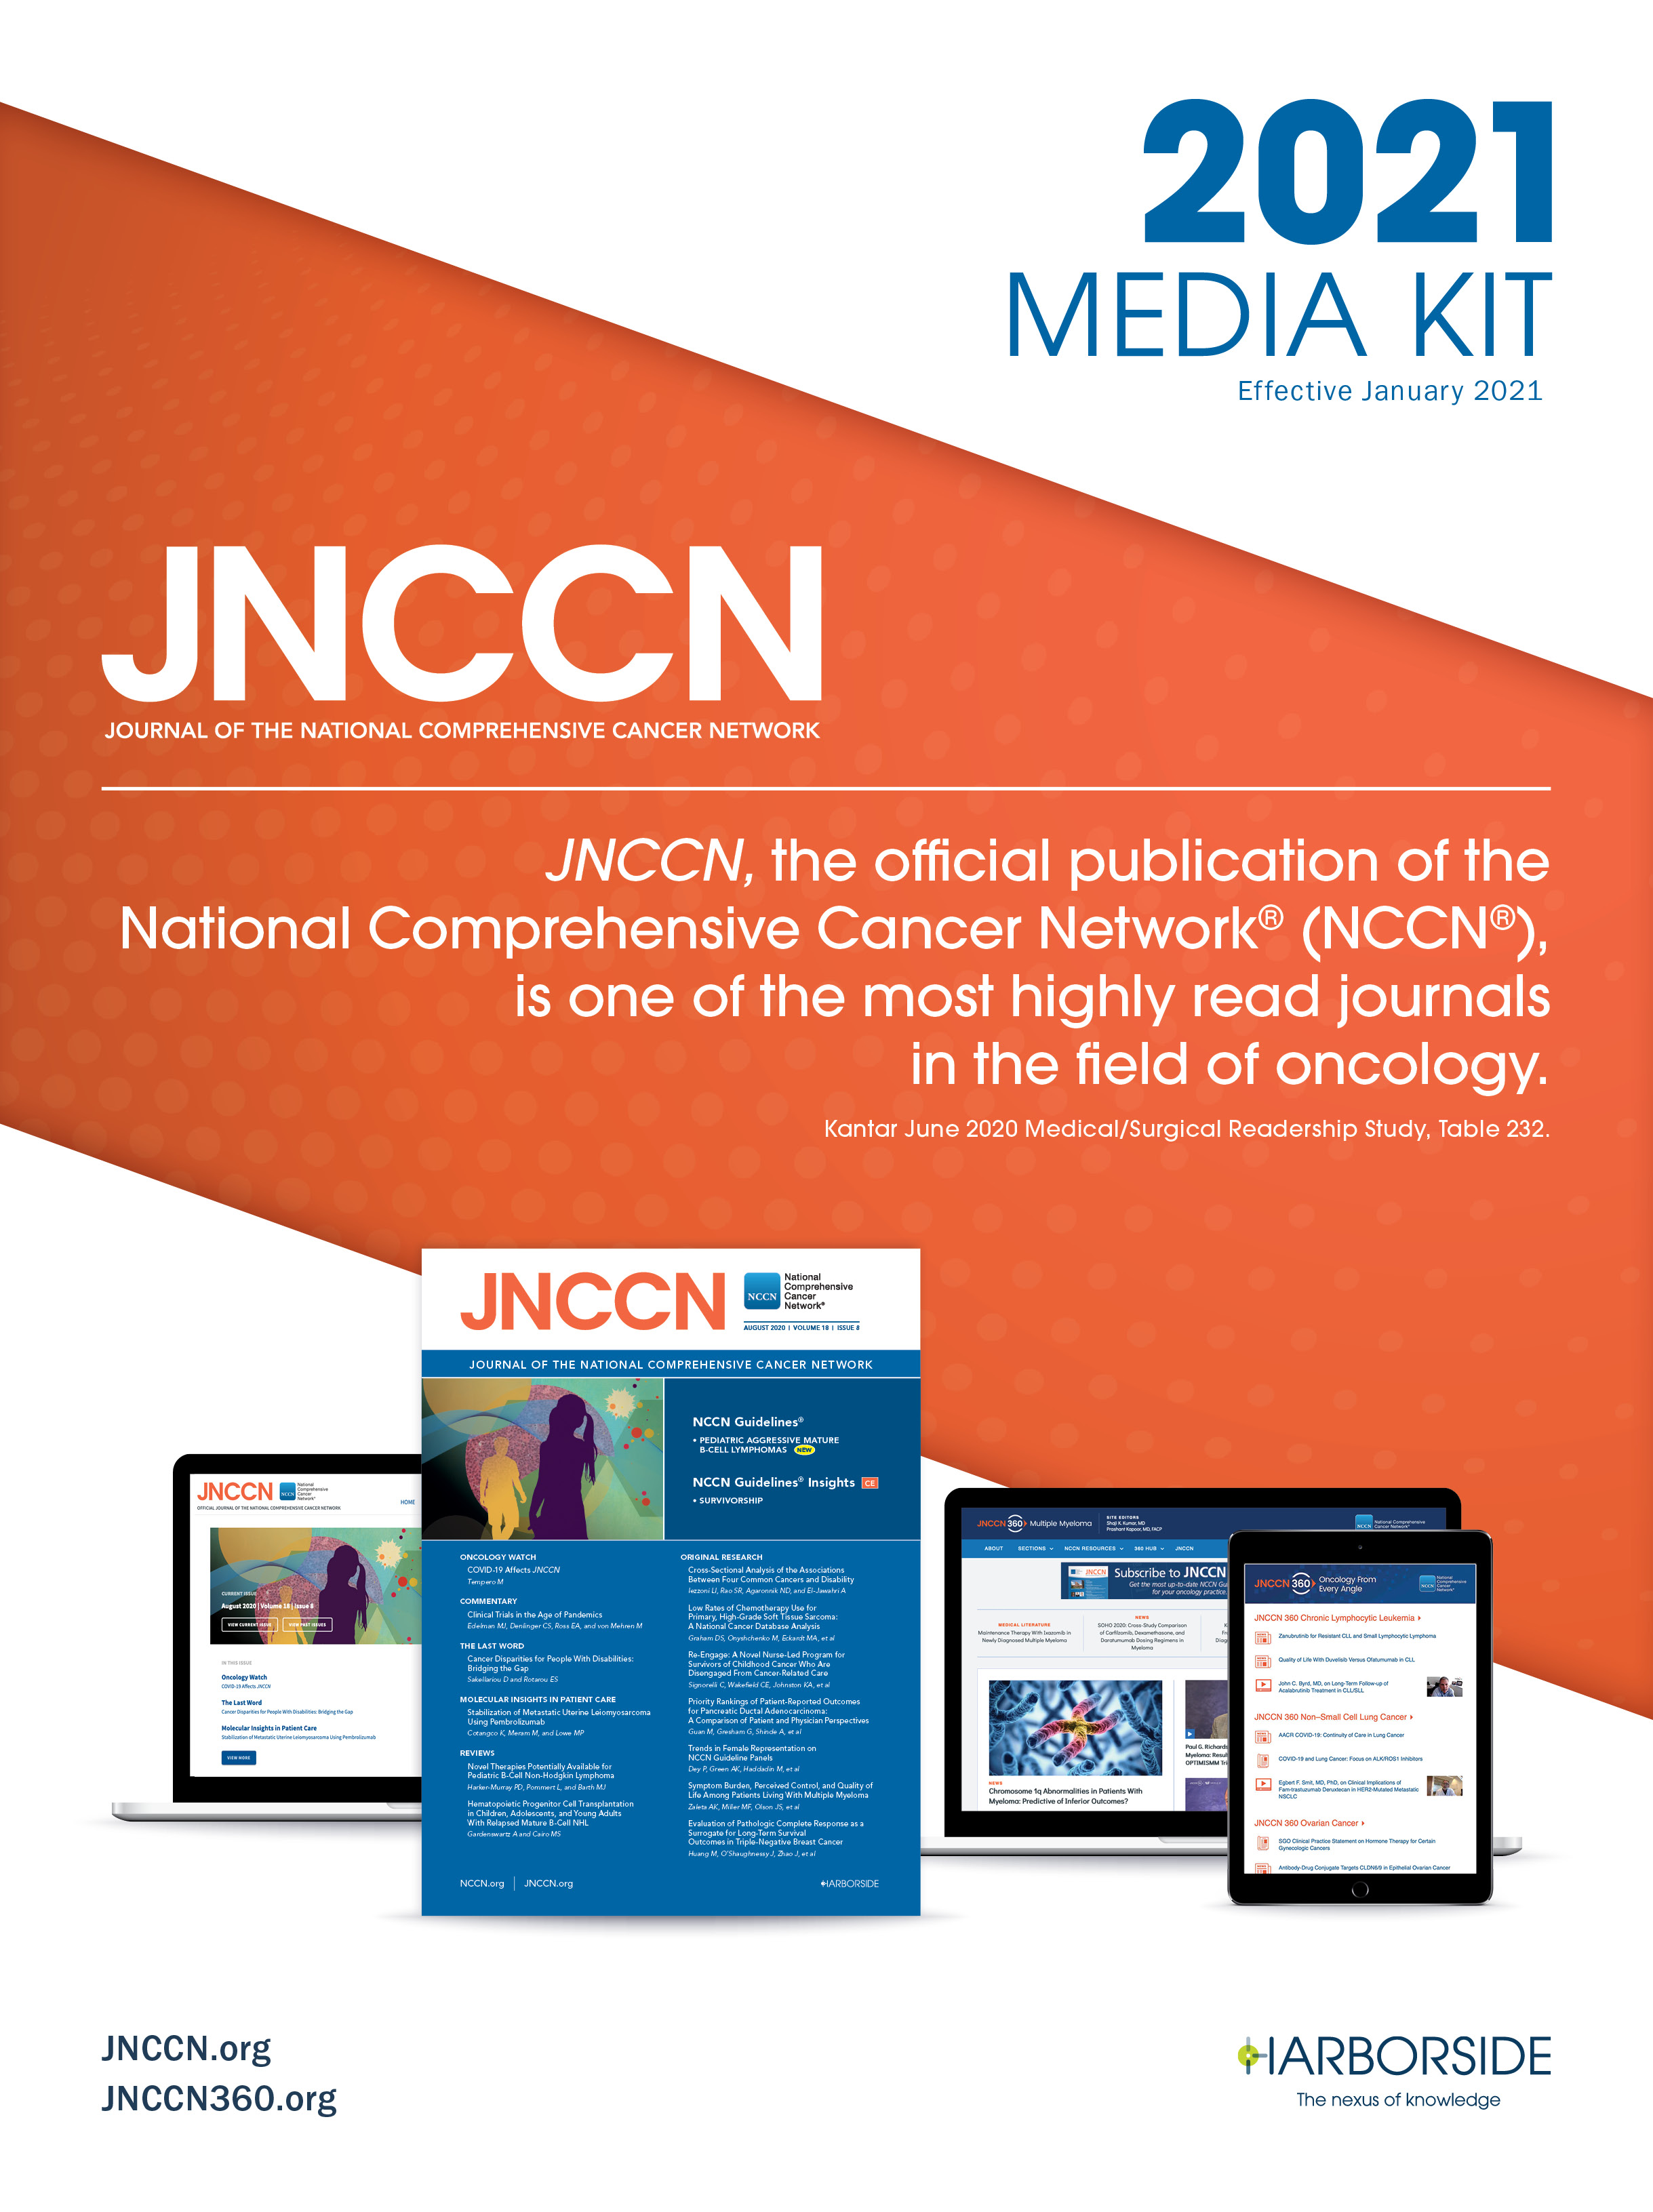 Journal of the National Comprehensive Cancer Network Rate Card Image